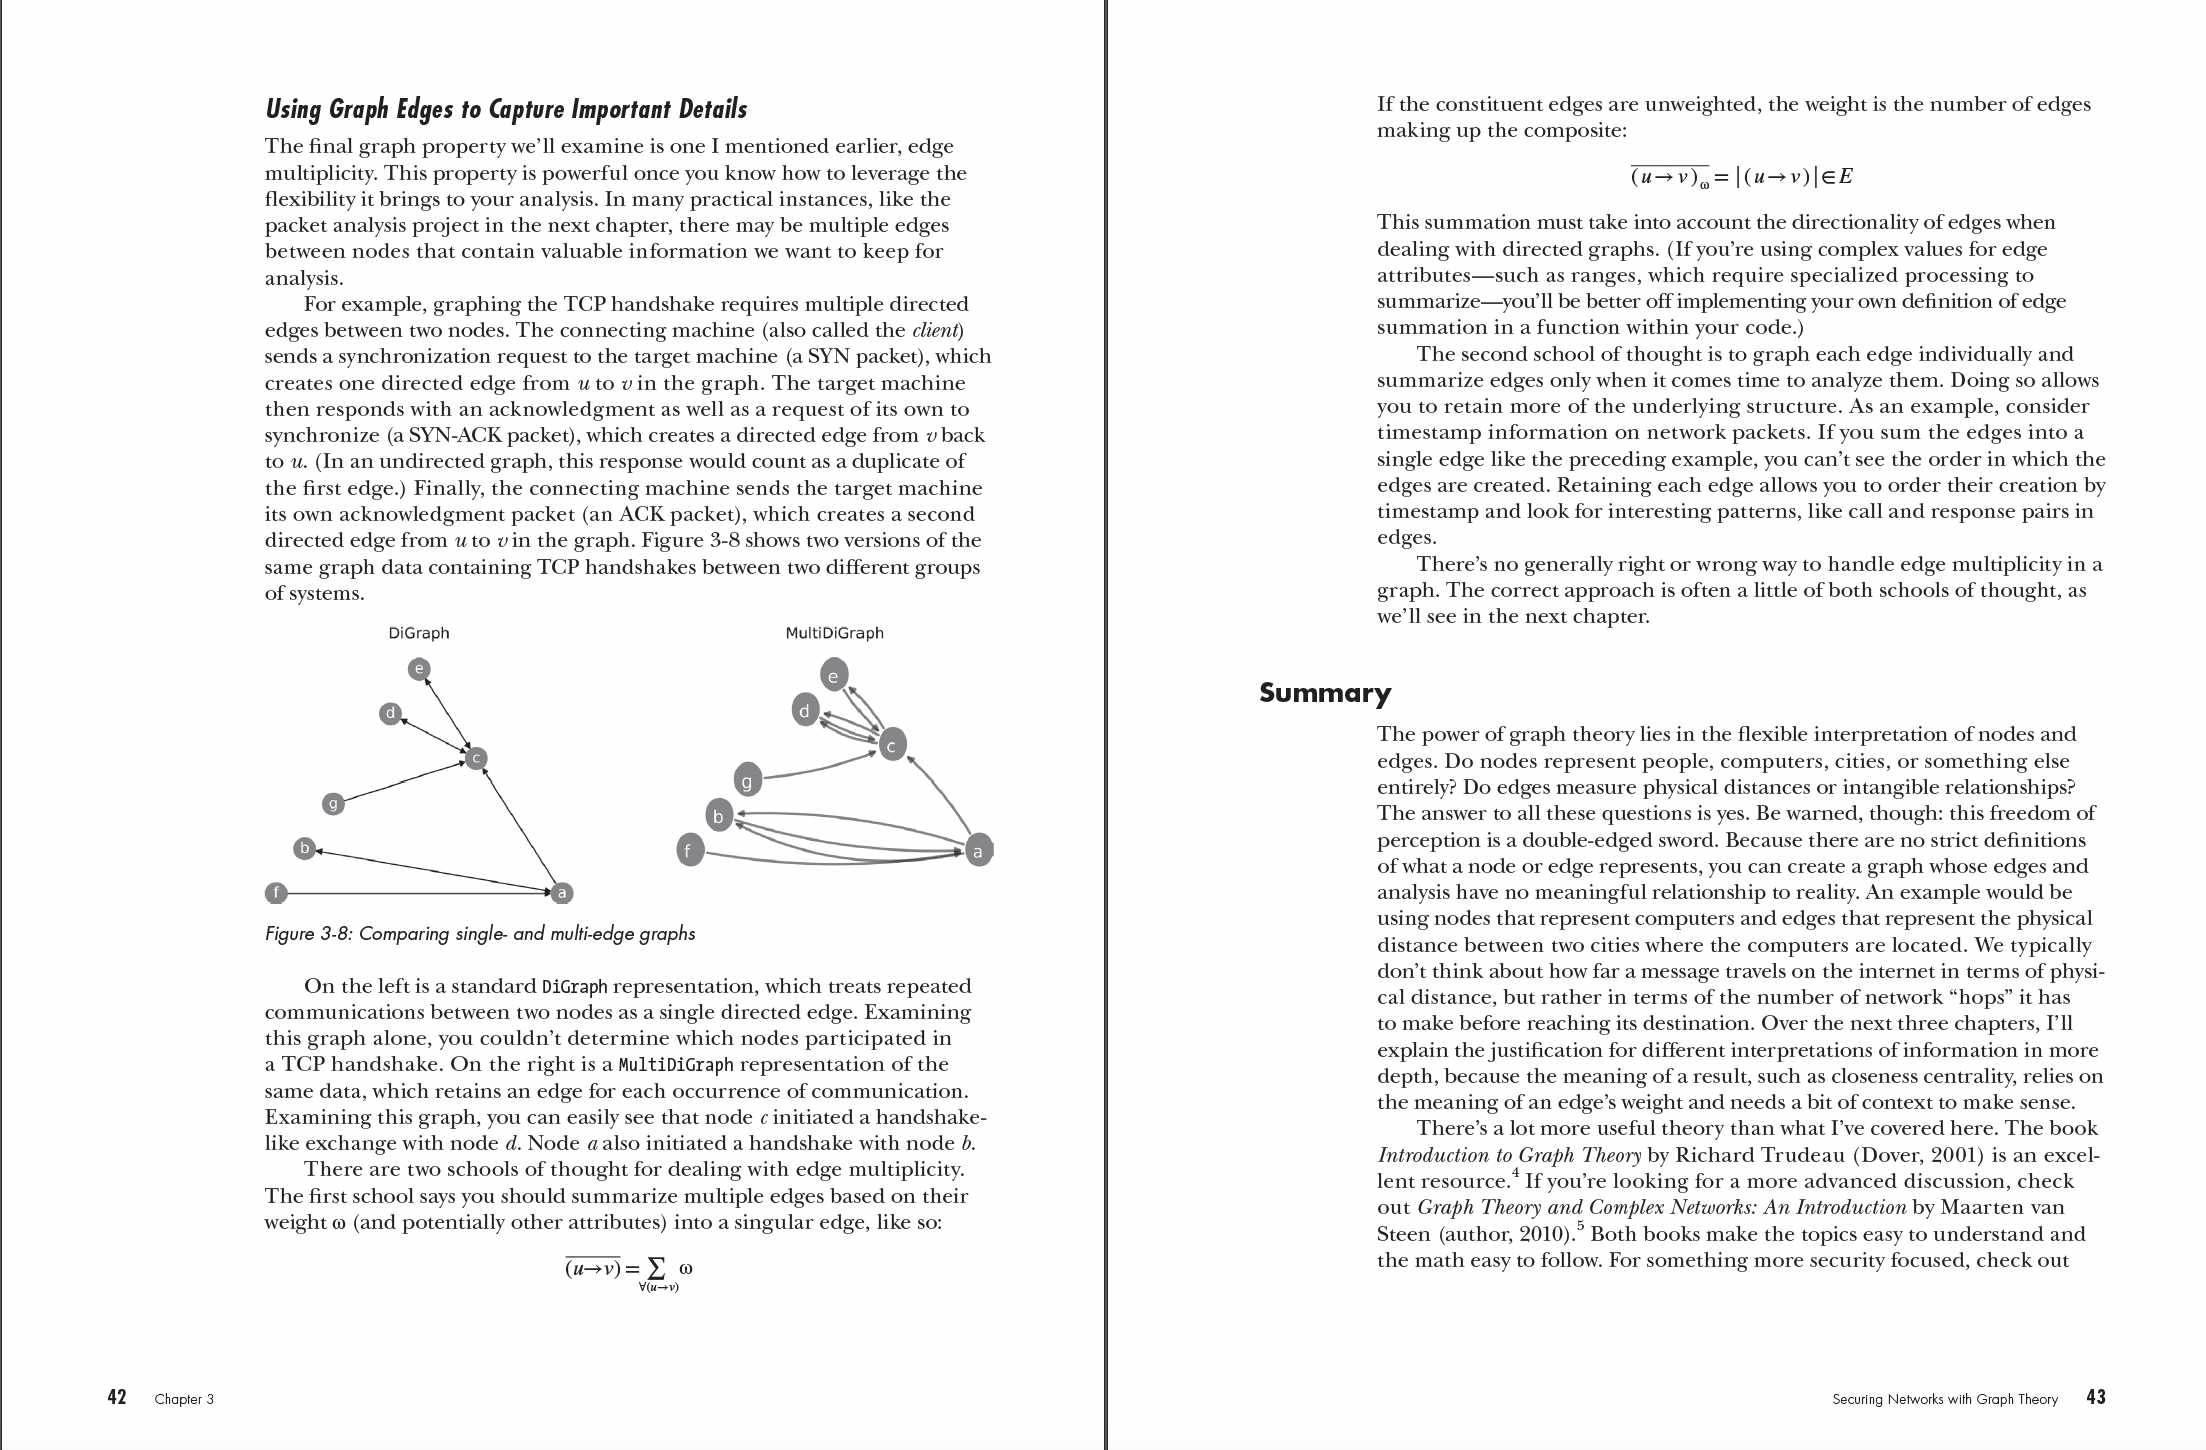 Math for Security pages 42-43